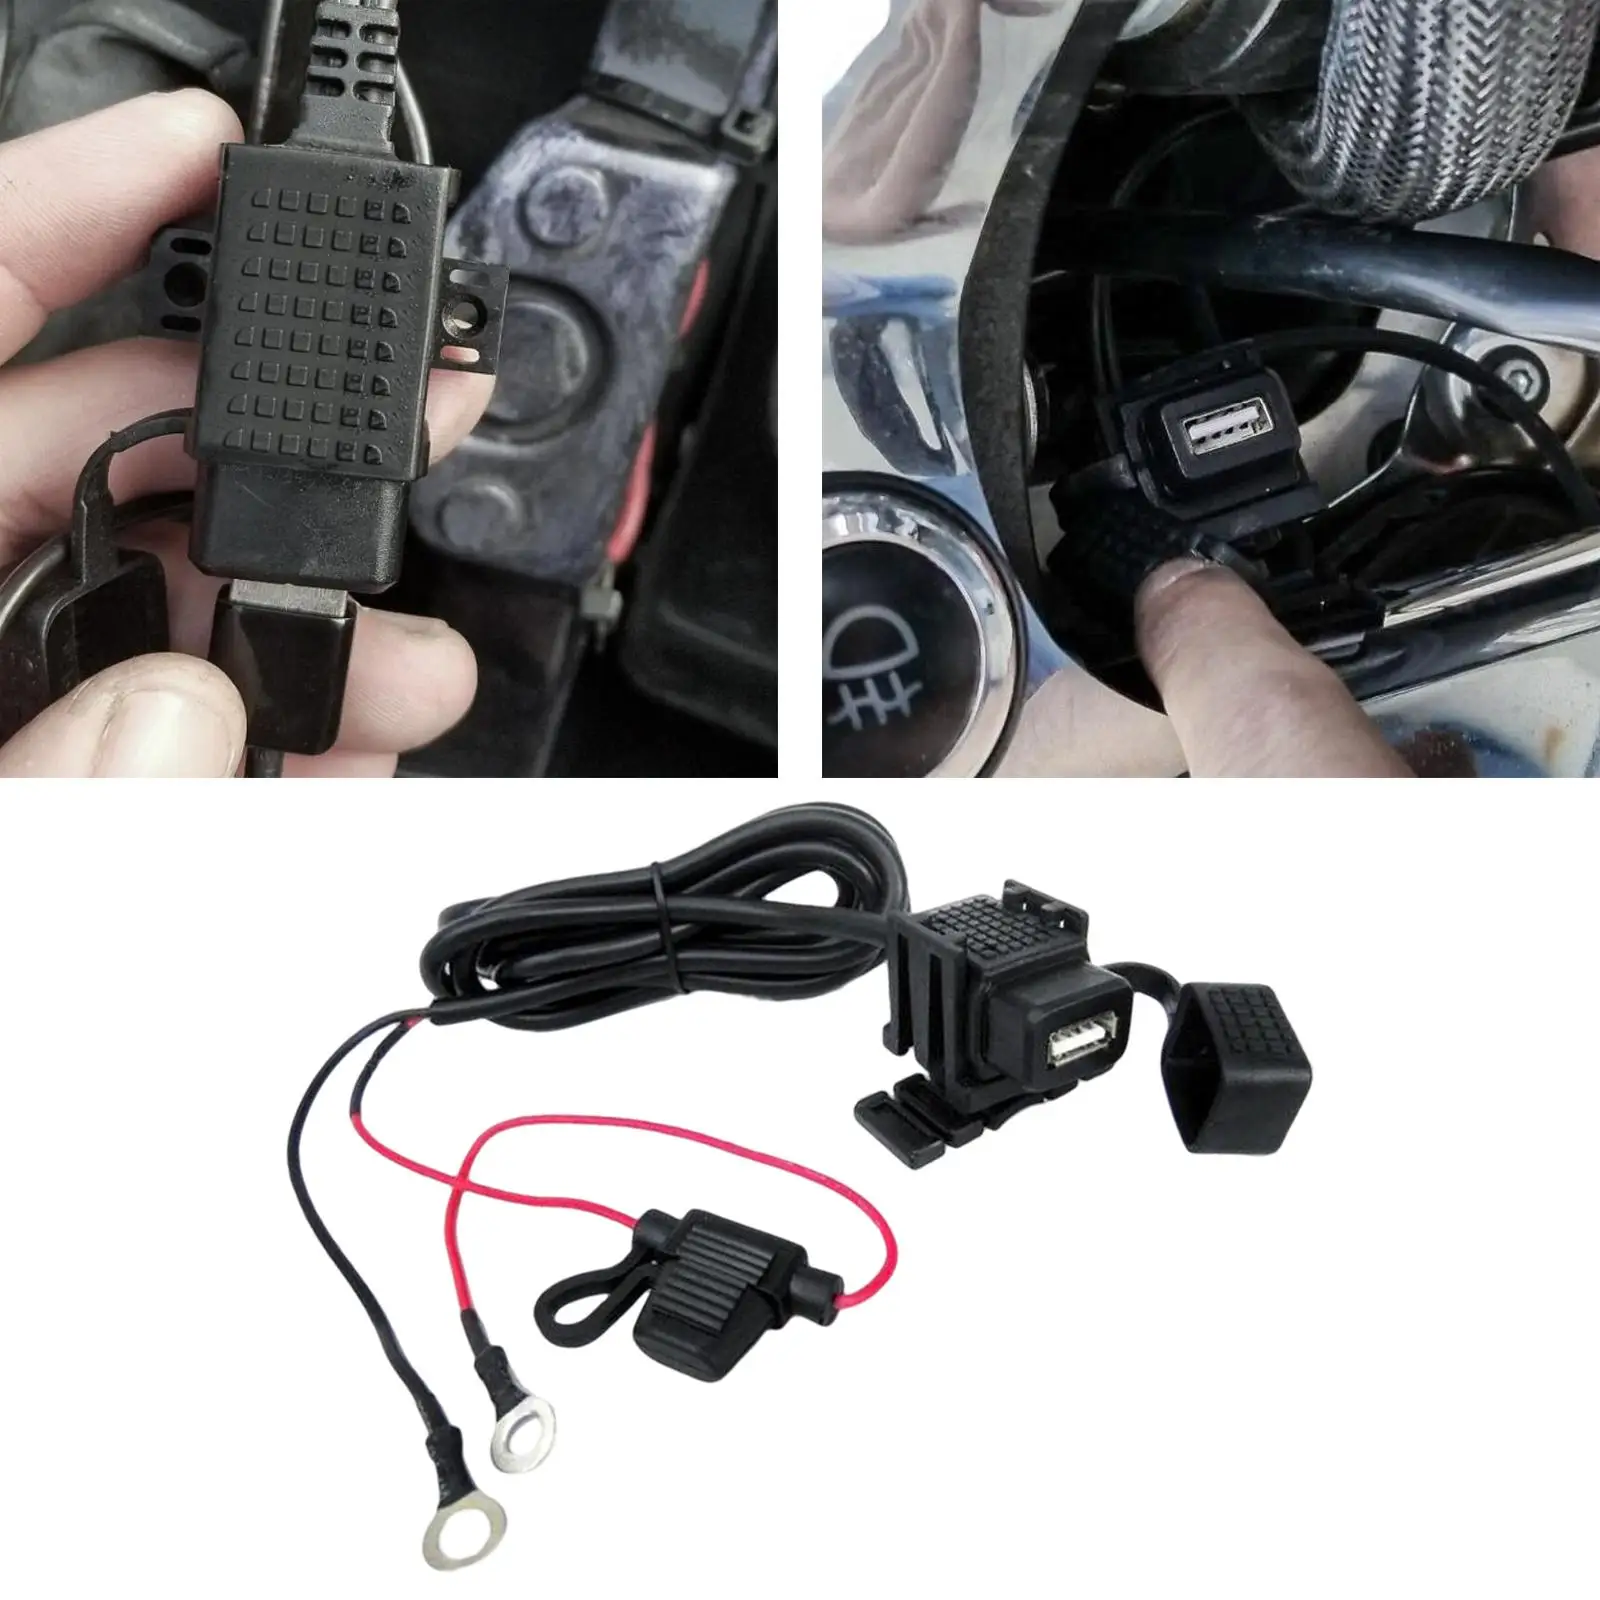 Motorcycle USB Phone Charger Adapter Cable USB Adapter Cable 5V 2.1A Phone Tablet Charger for Phone Motorcycle Accessories Part